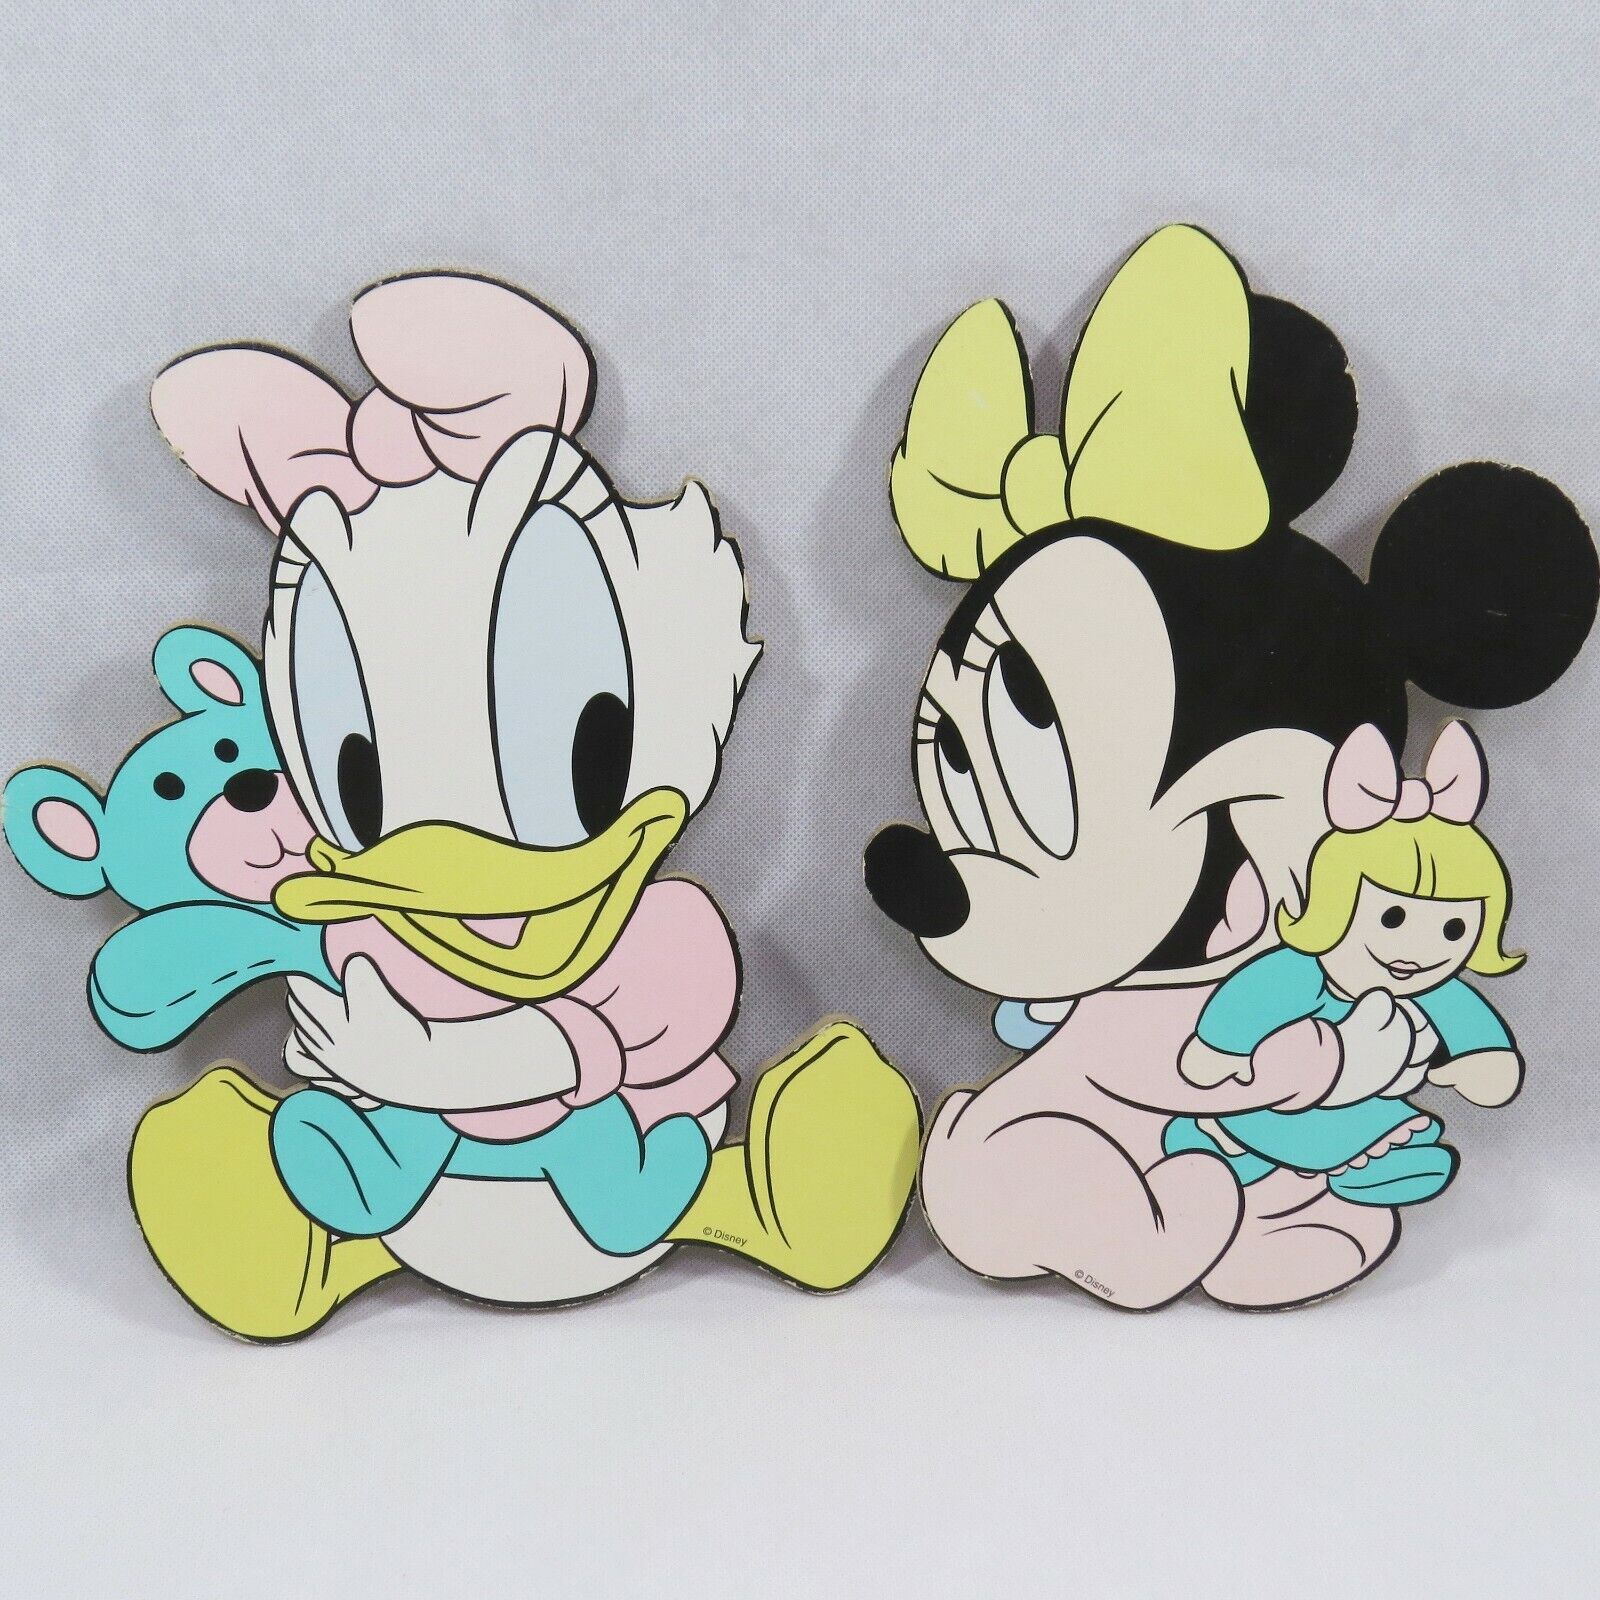 Vintage Baby Minnie Mouse and Daisy Duck Nursery Wall Hangings Decor Disney